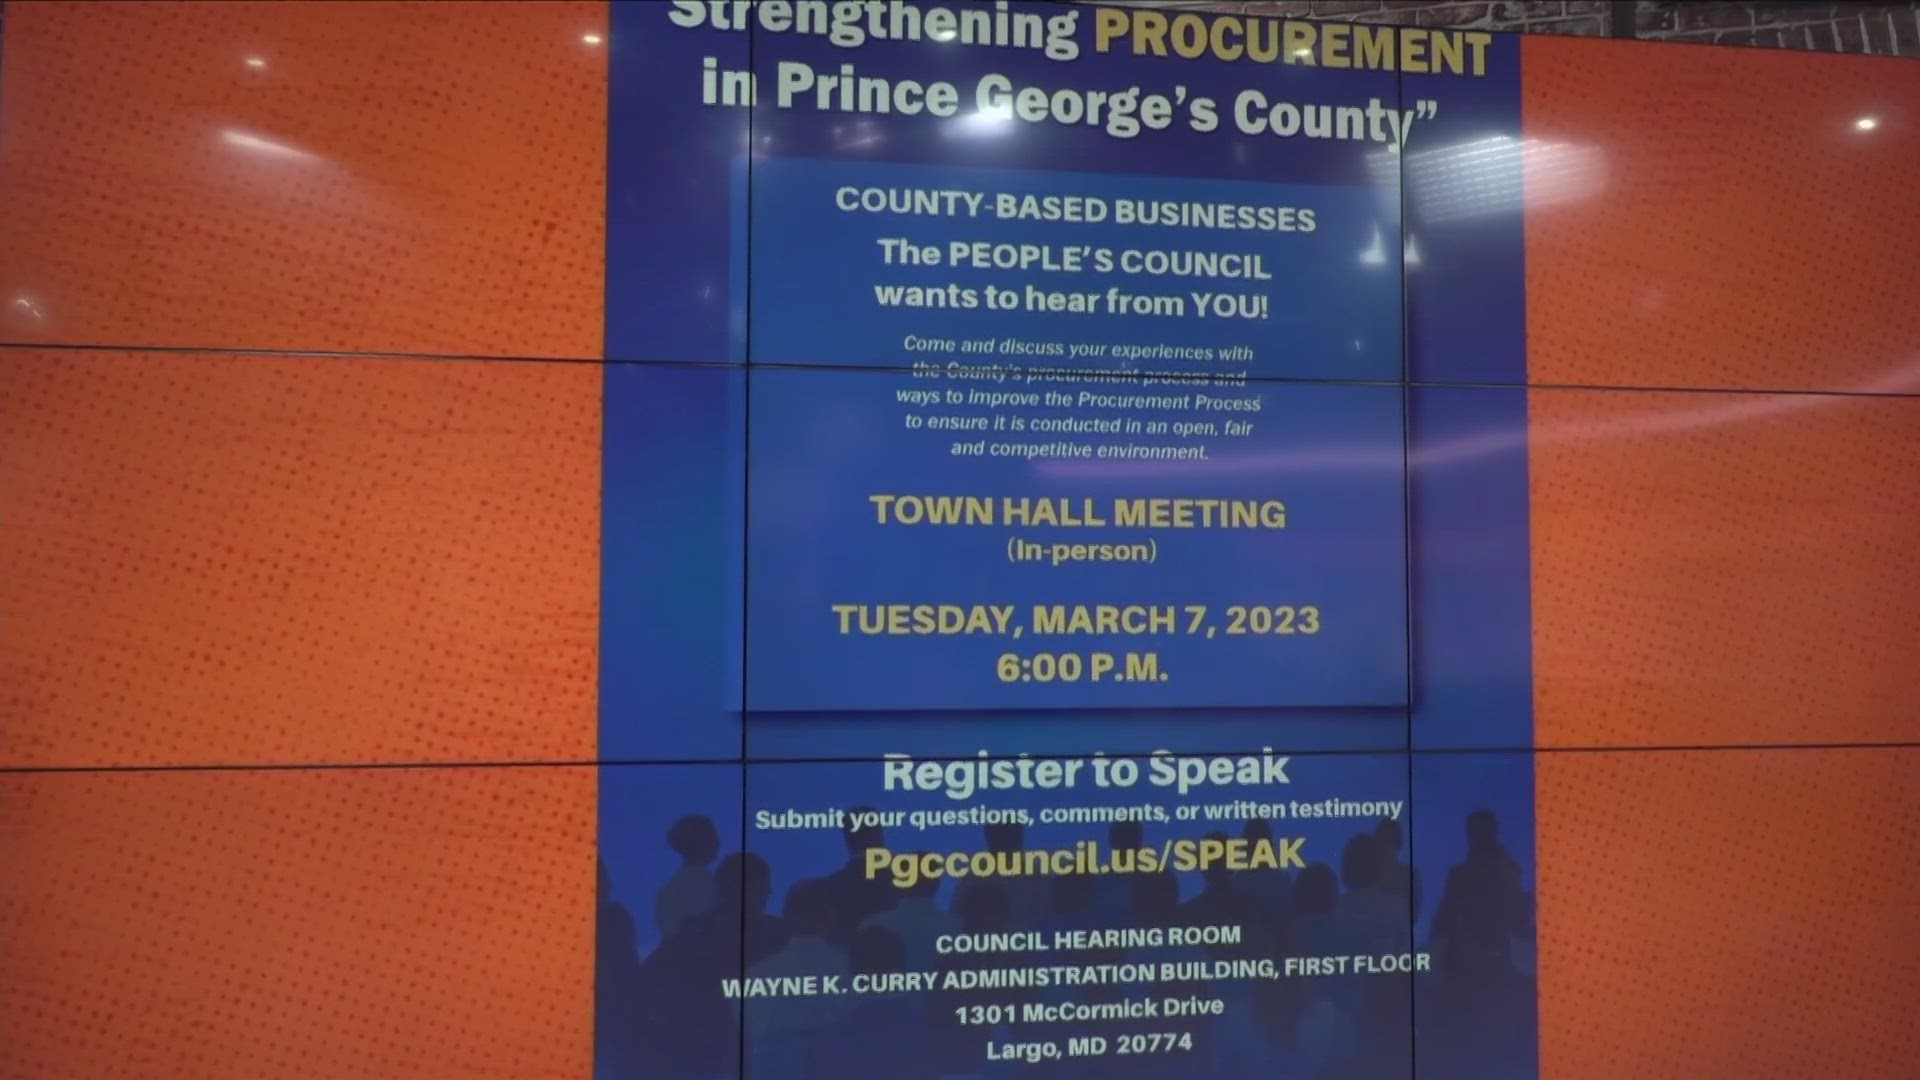 Some small business owners say they are facing unnecessary barriers in the county.